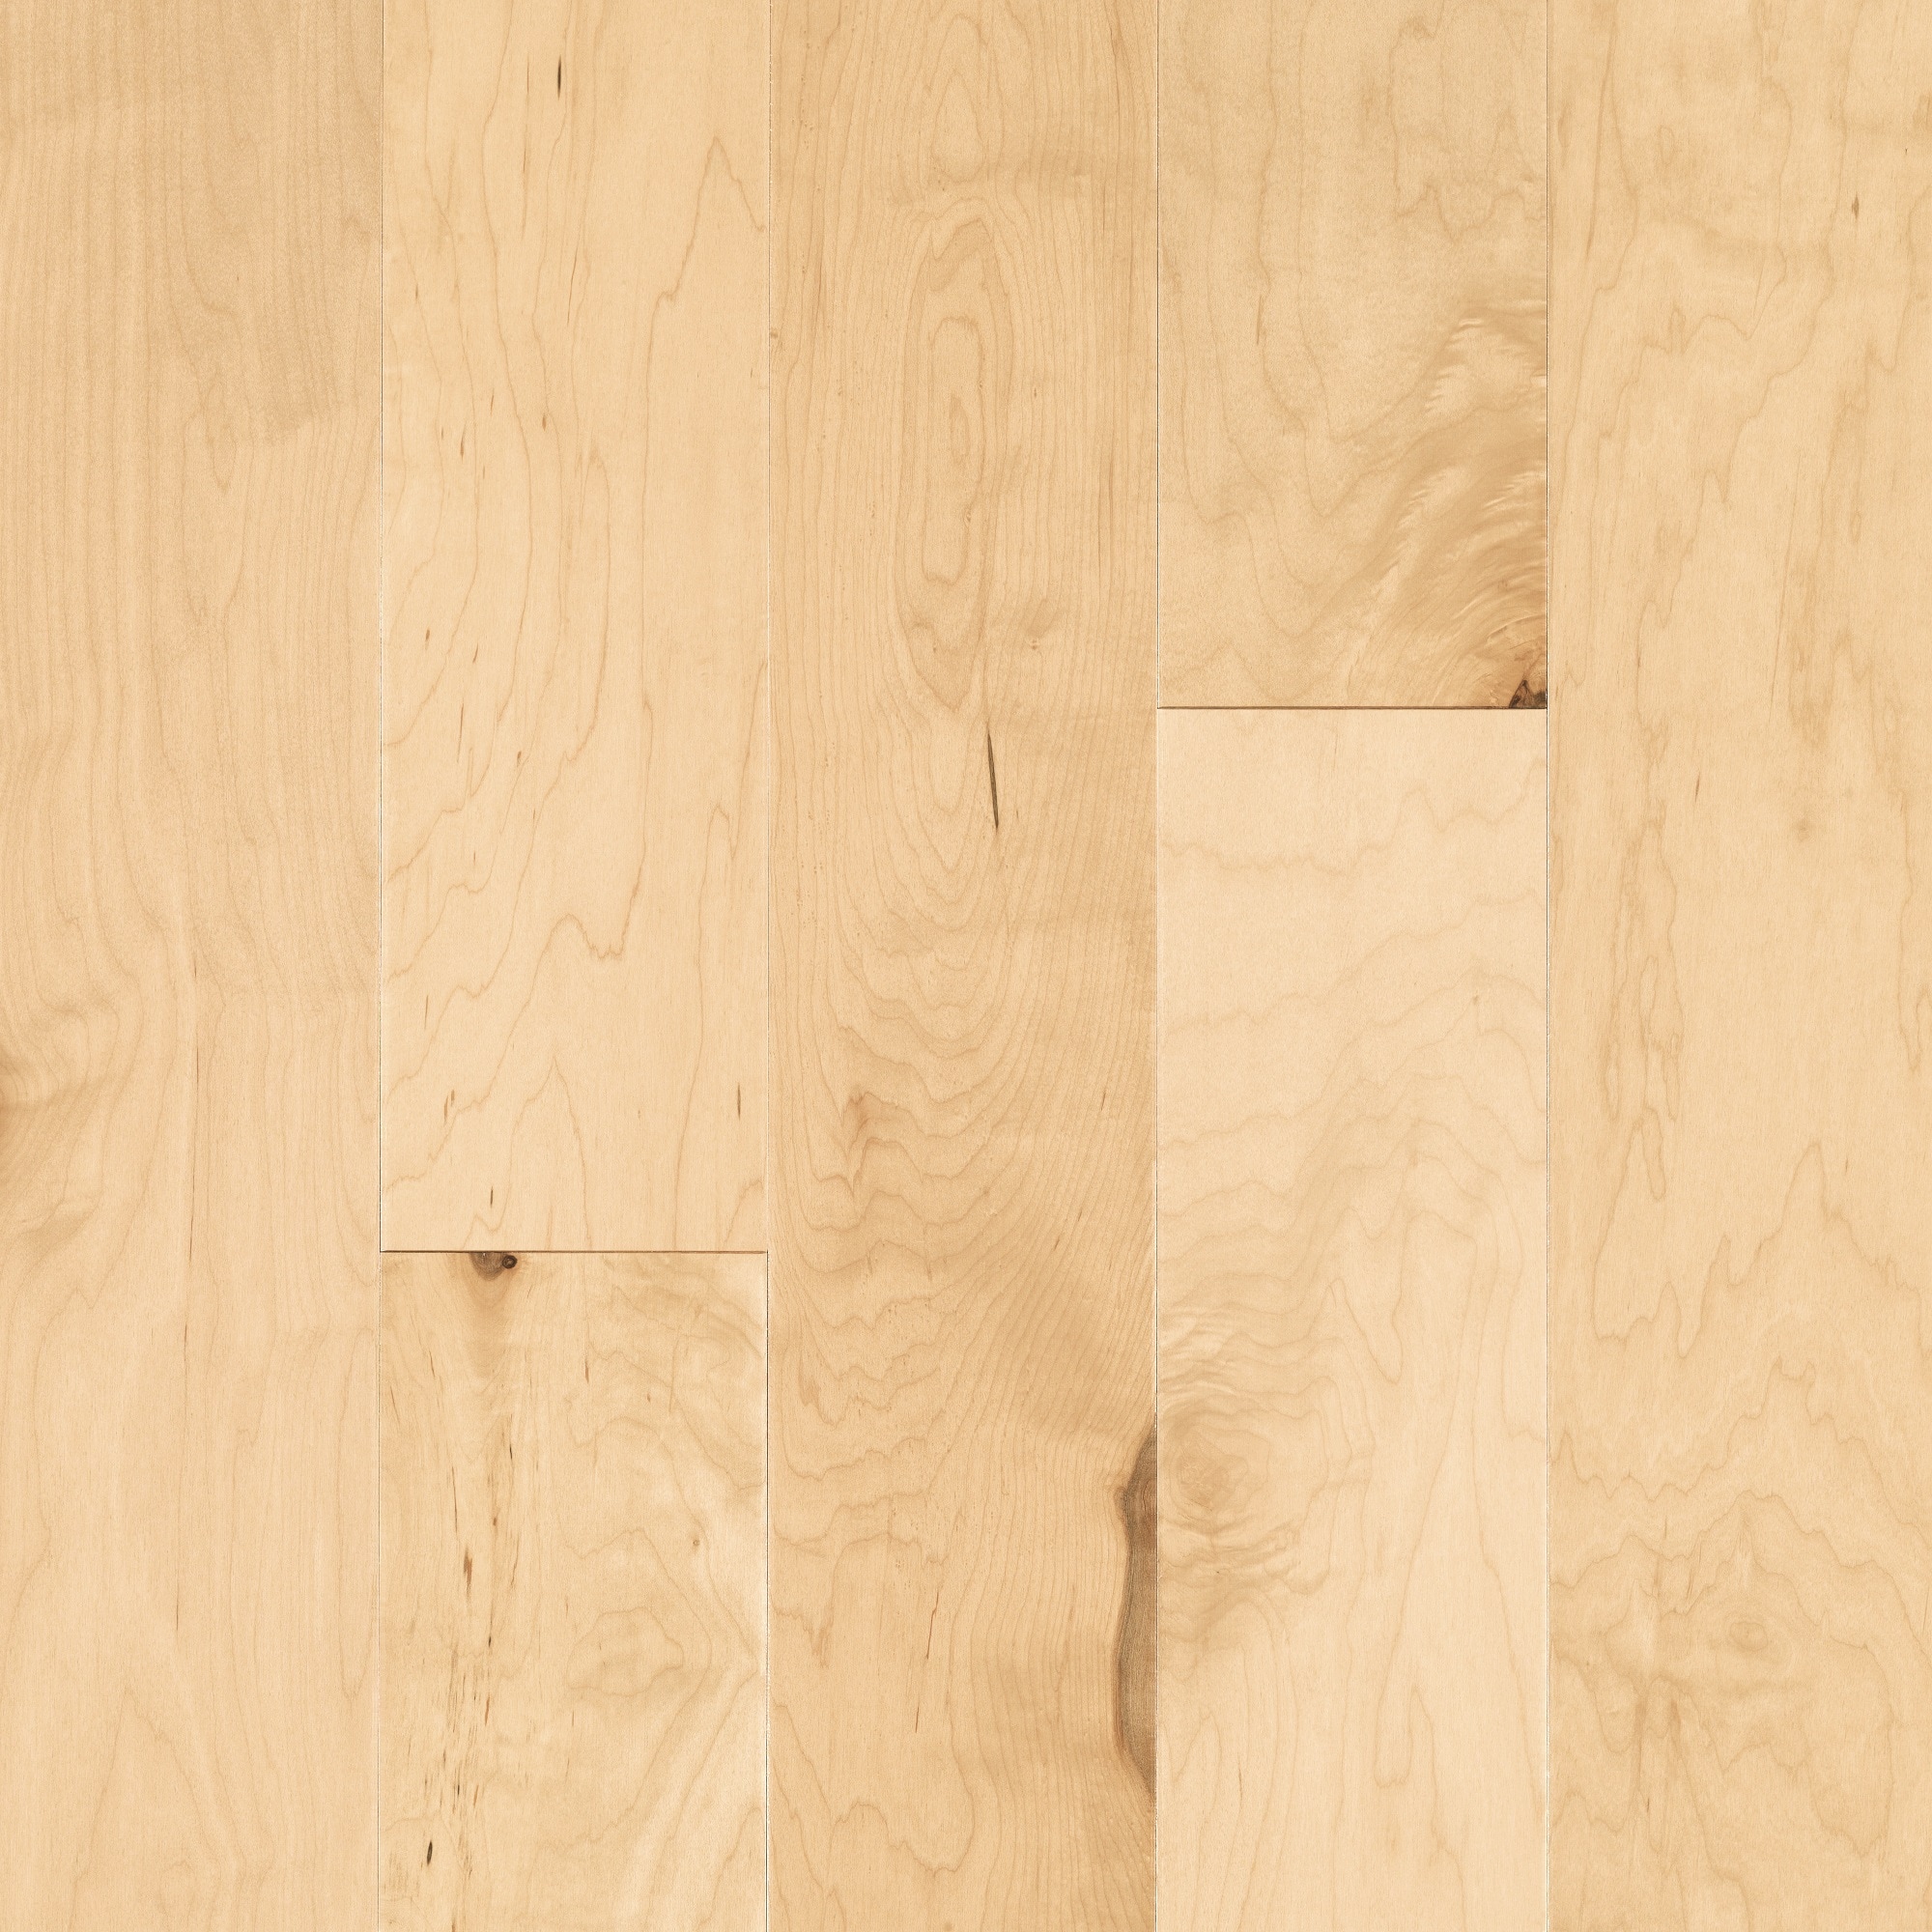 Pergo Max Natural Maple 5 1 4 In Wide X, Weight Of Hardwood Flooring Per Square Foot